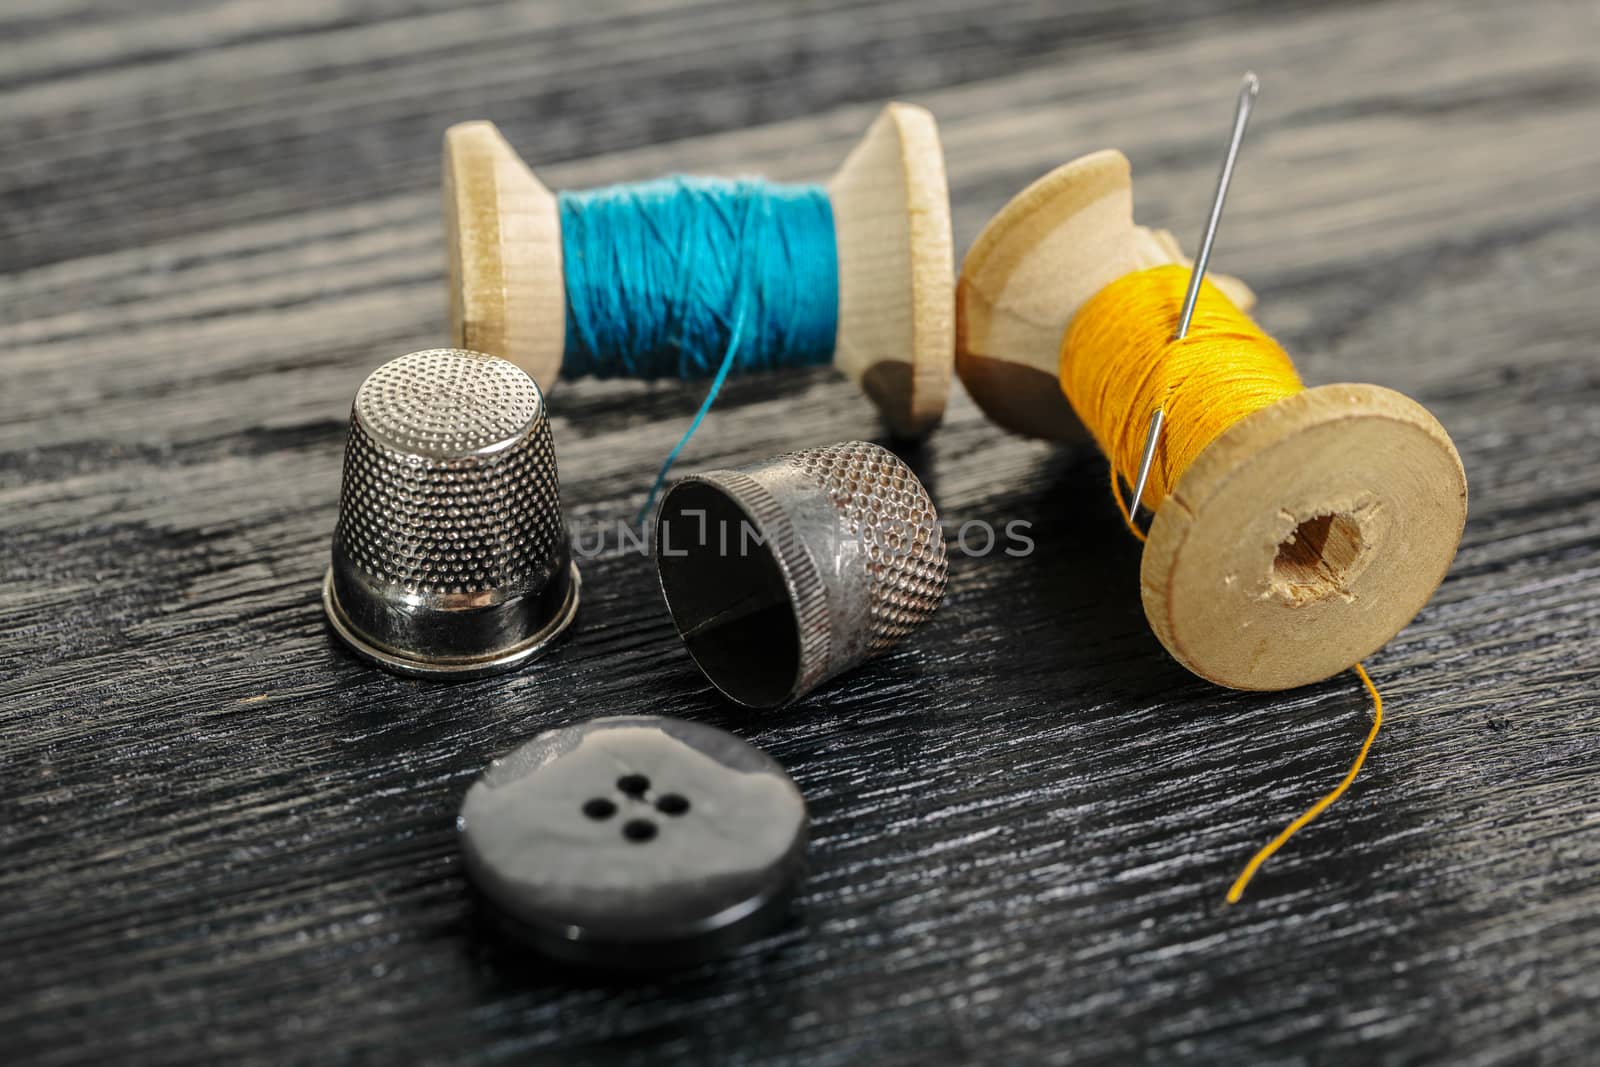 Thread with a thimble and button on black wooden background